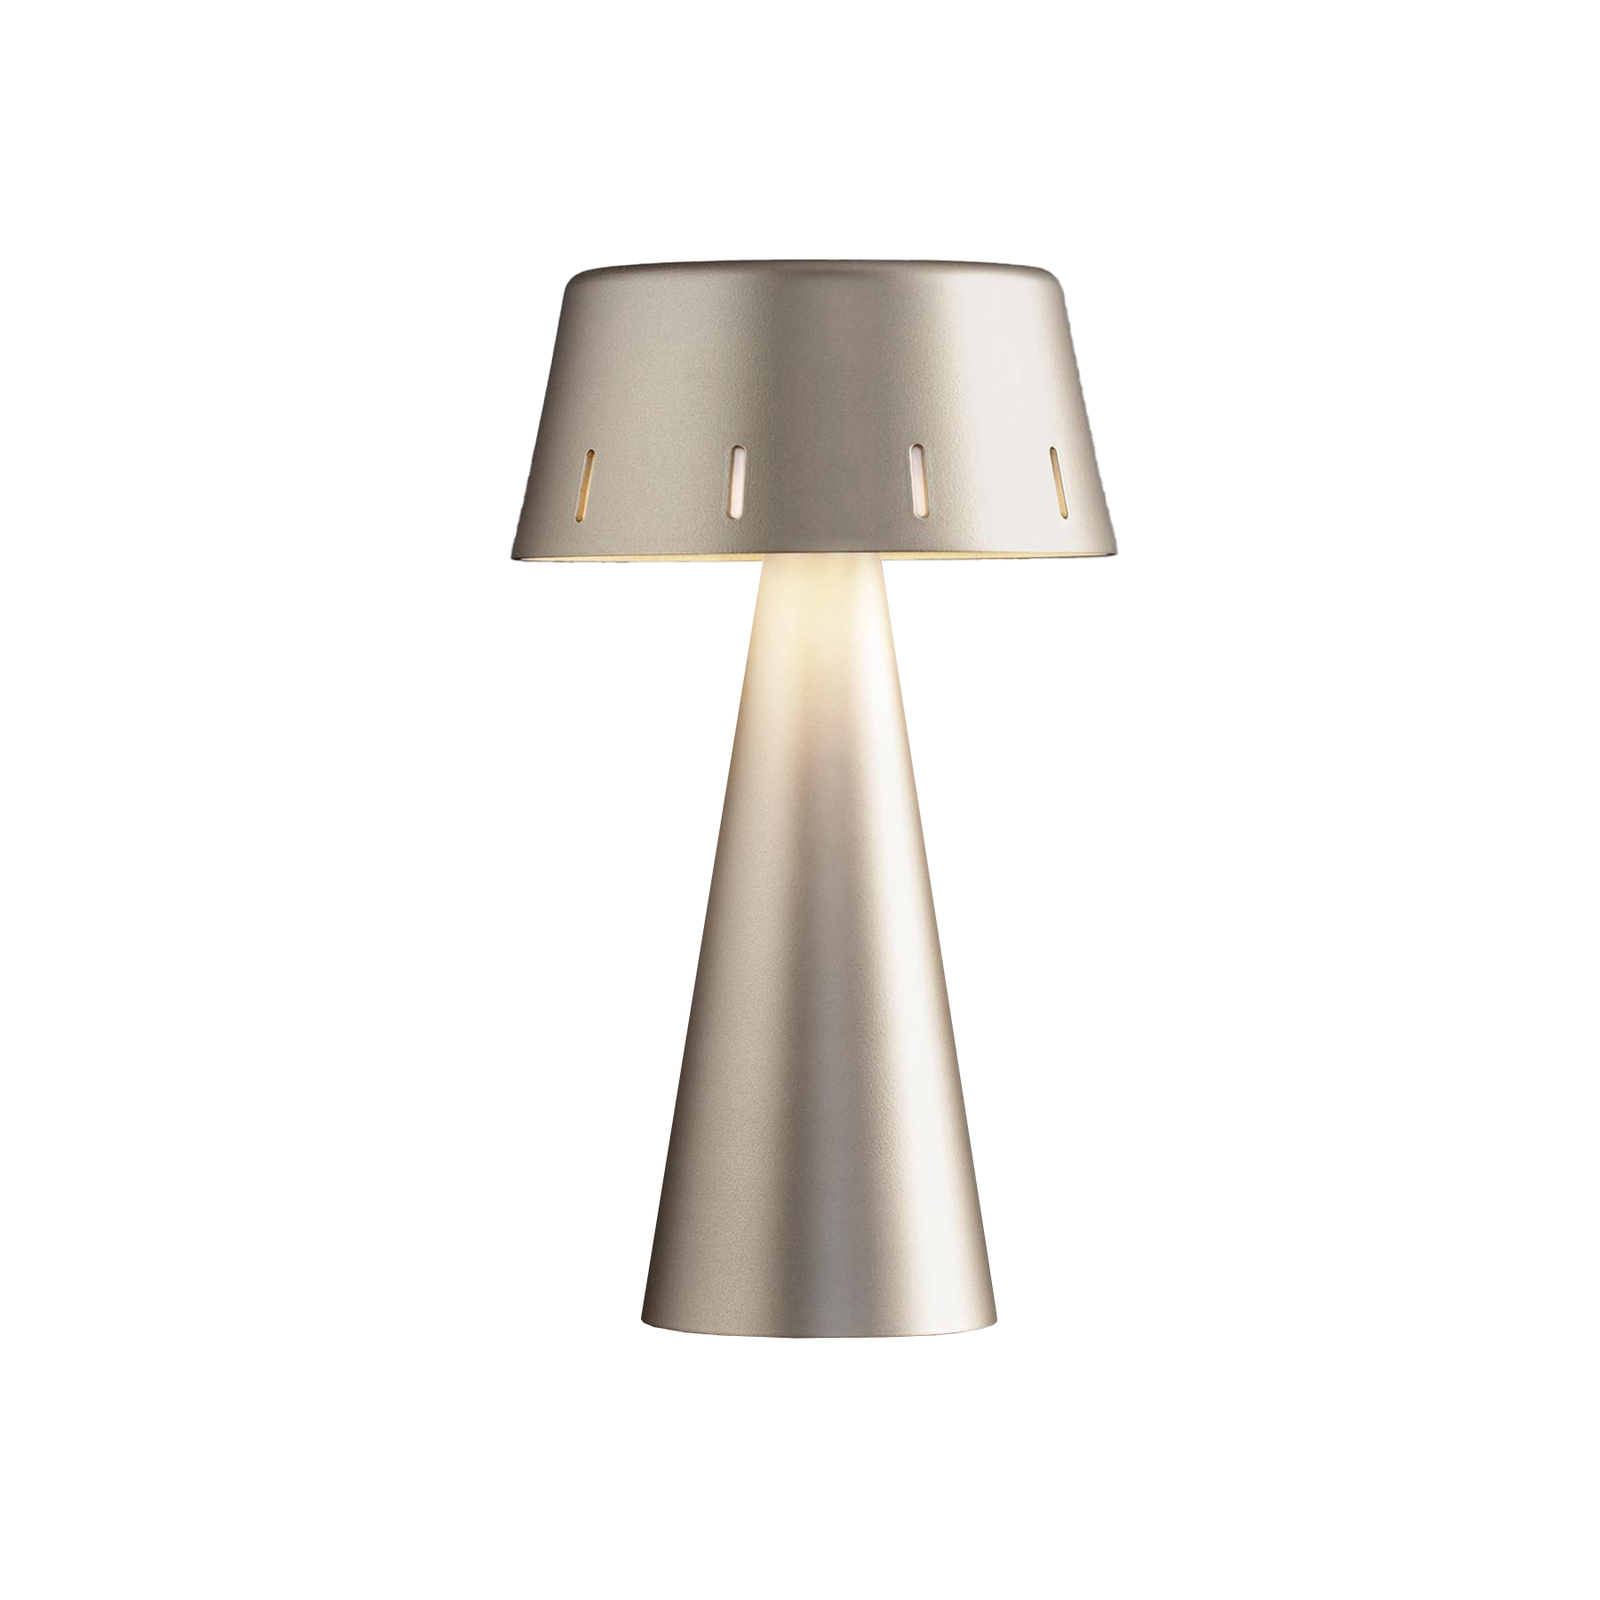 OLEV Makà LED table lamp with rechargeable battery, titanium